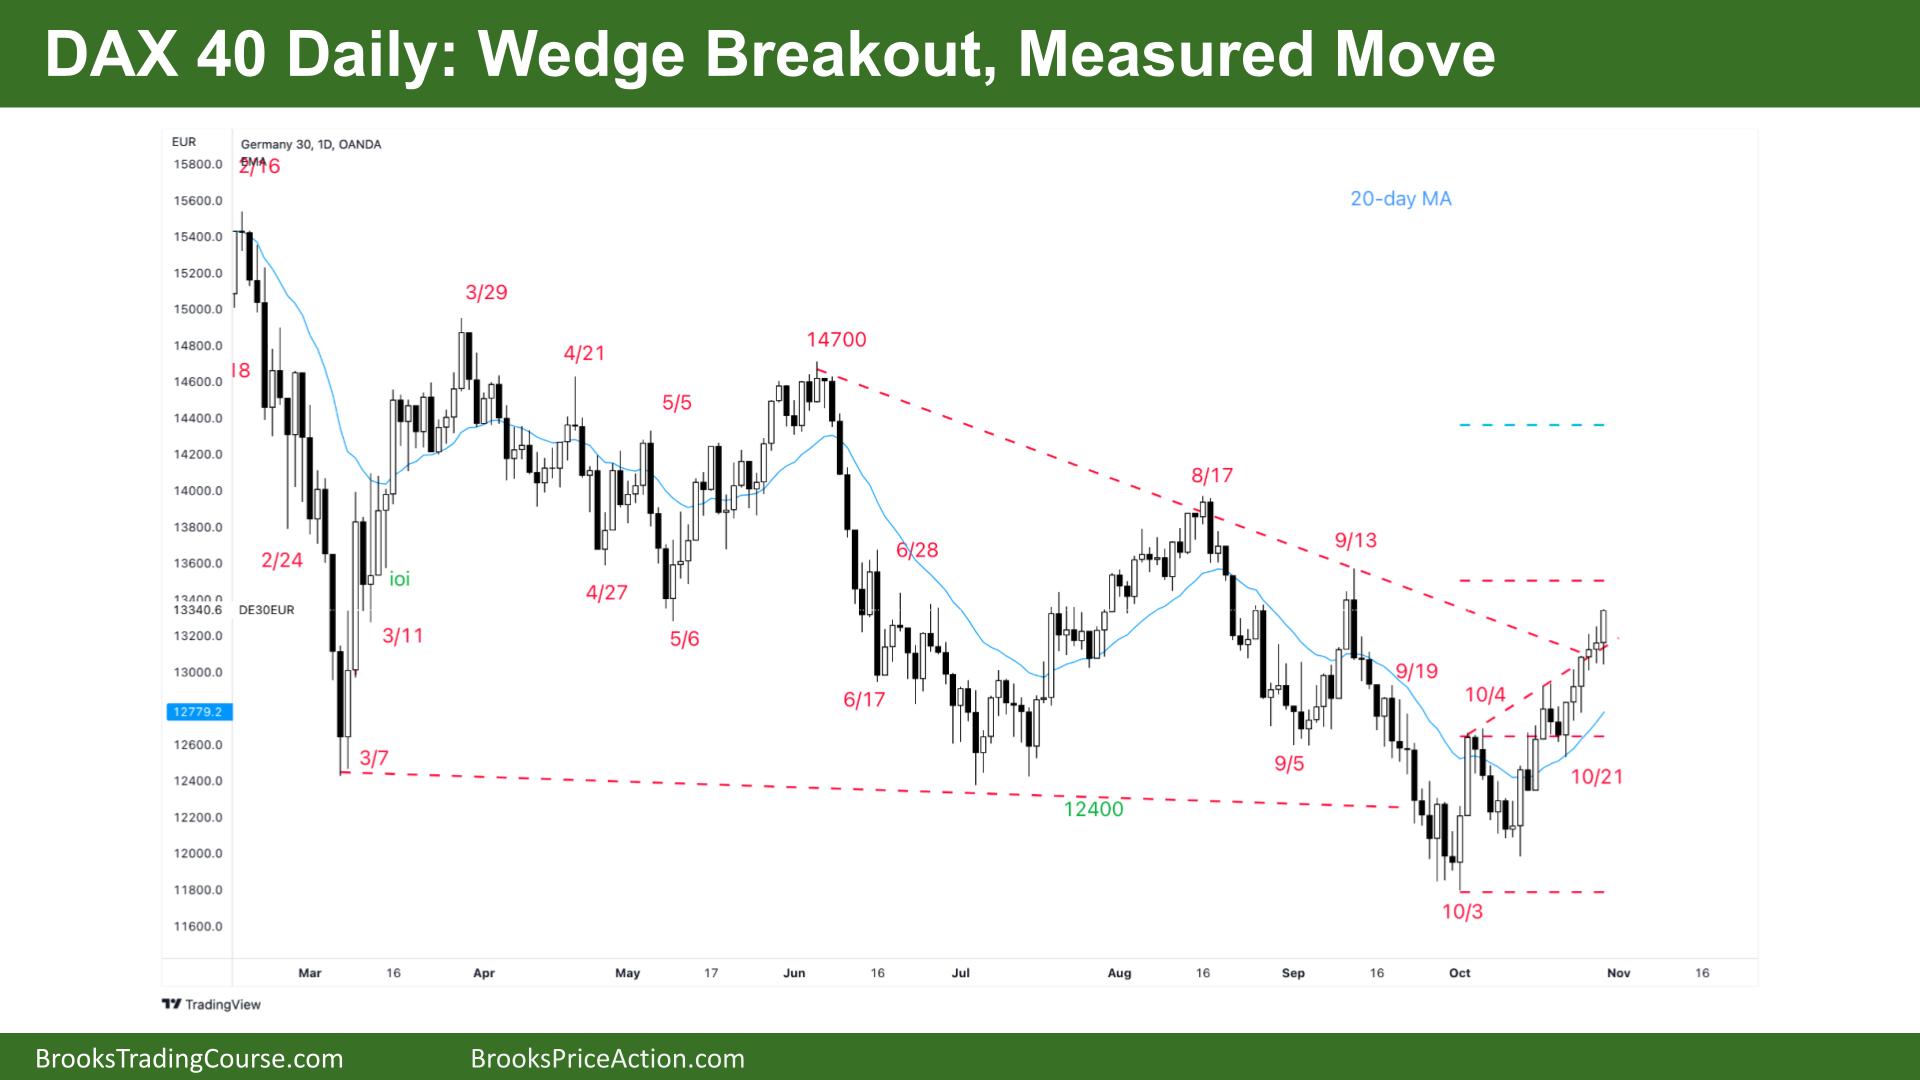 DAX 40 Daily Chart Wedge Breakout, Measured Move